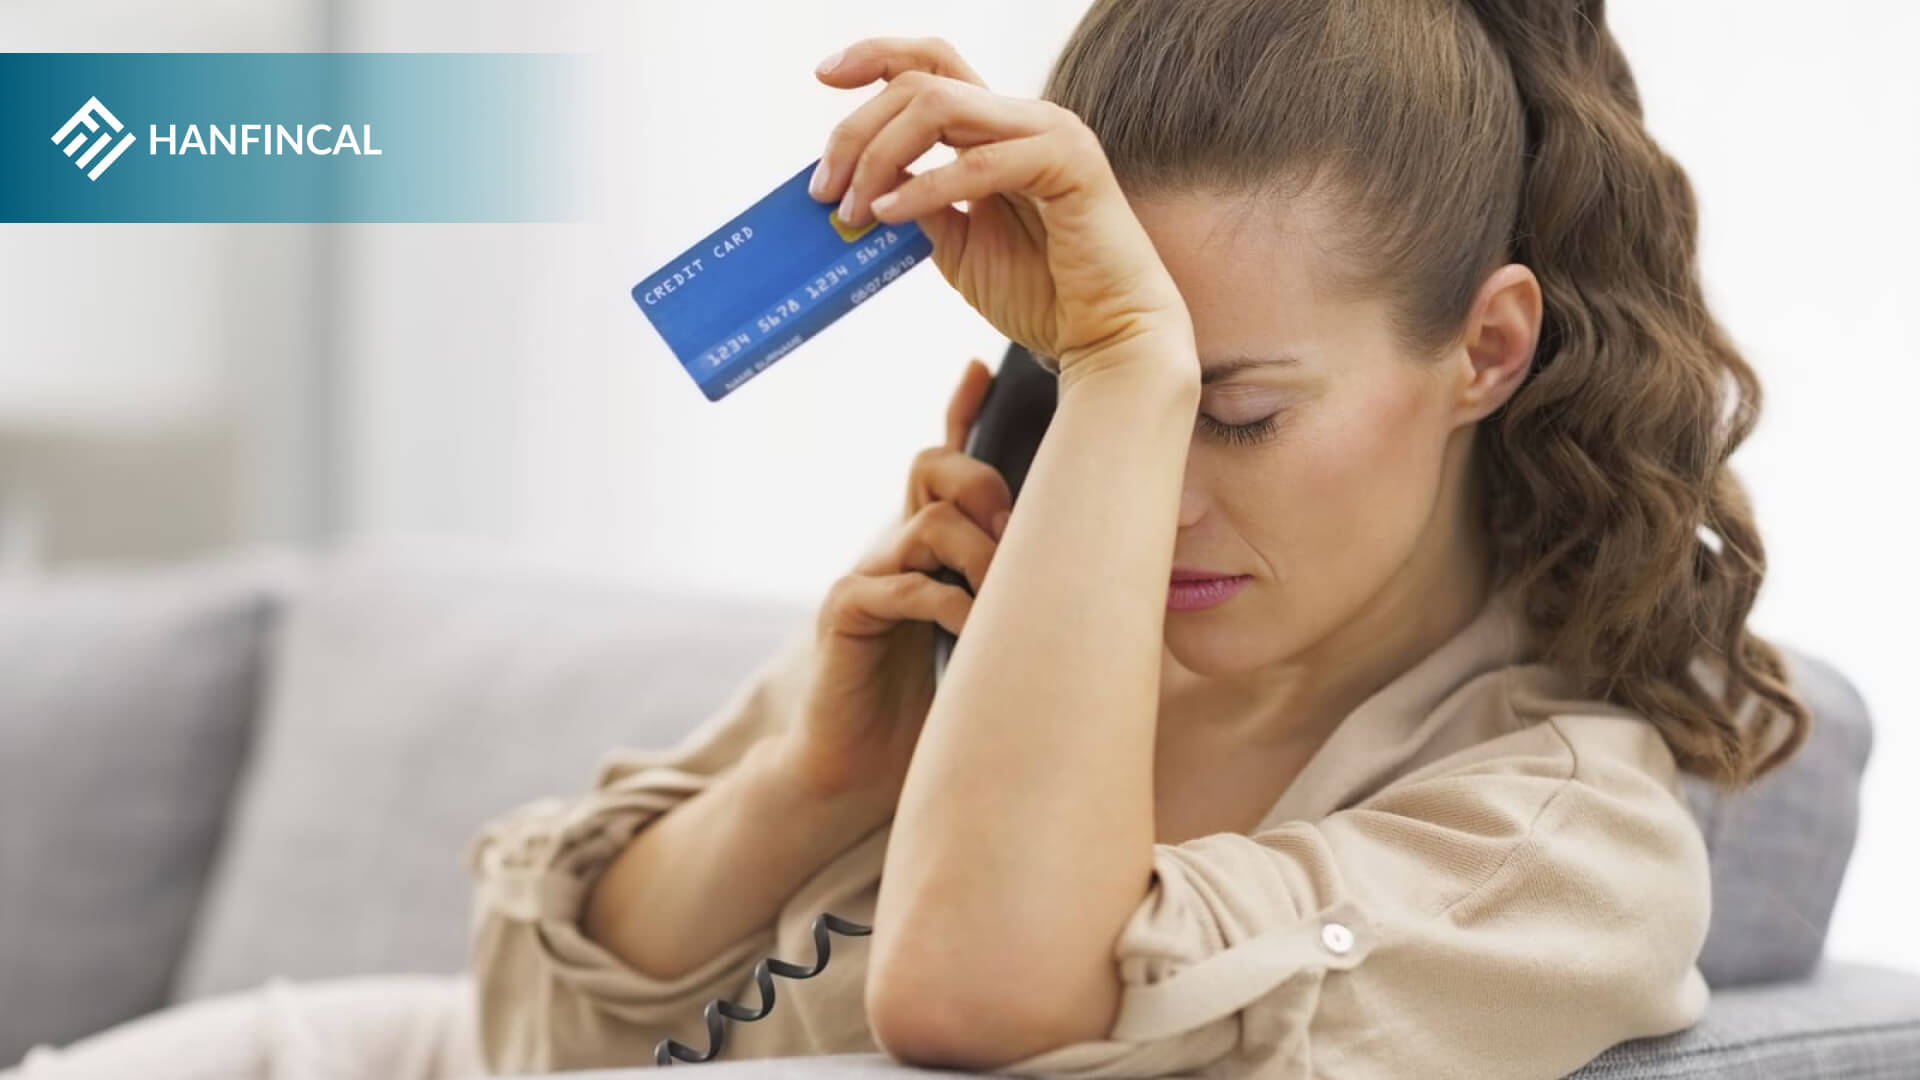 Consequences of too much credit card debt